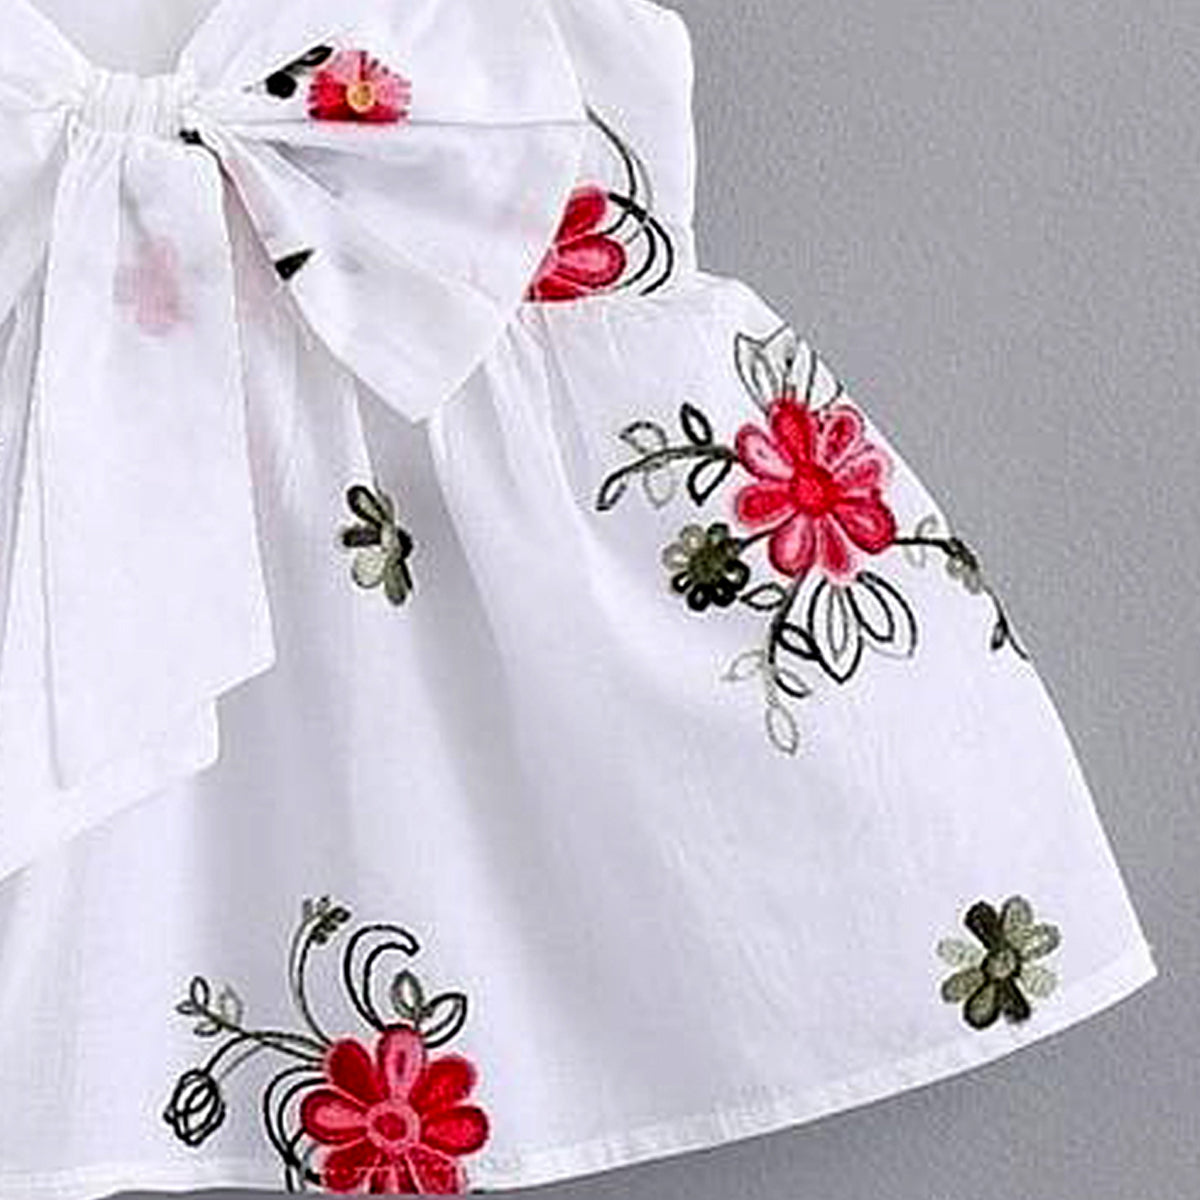 Details 146+ baby frock design pictures